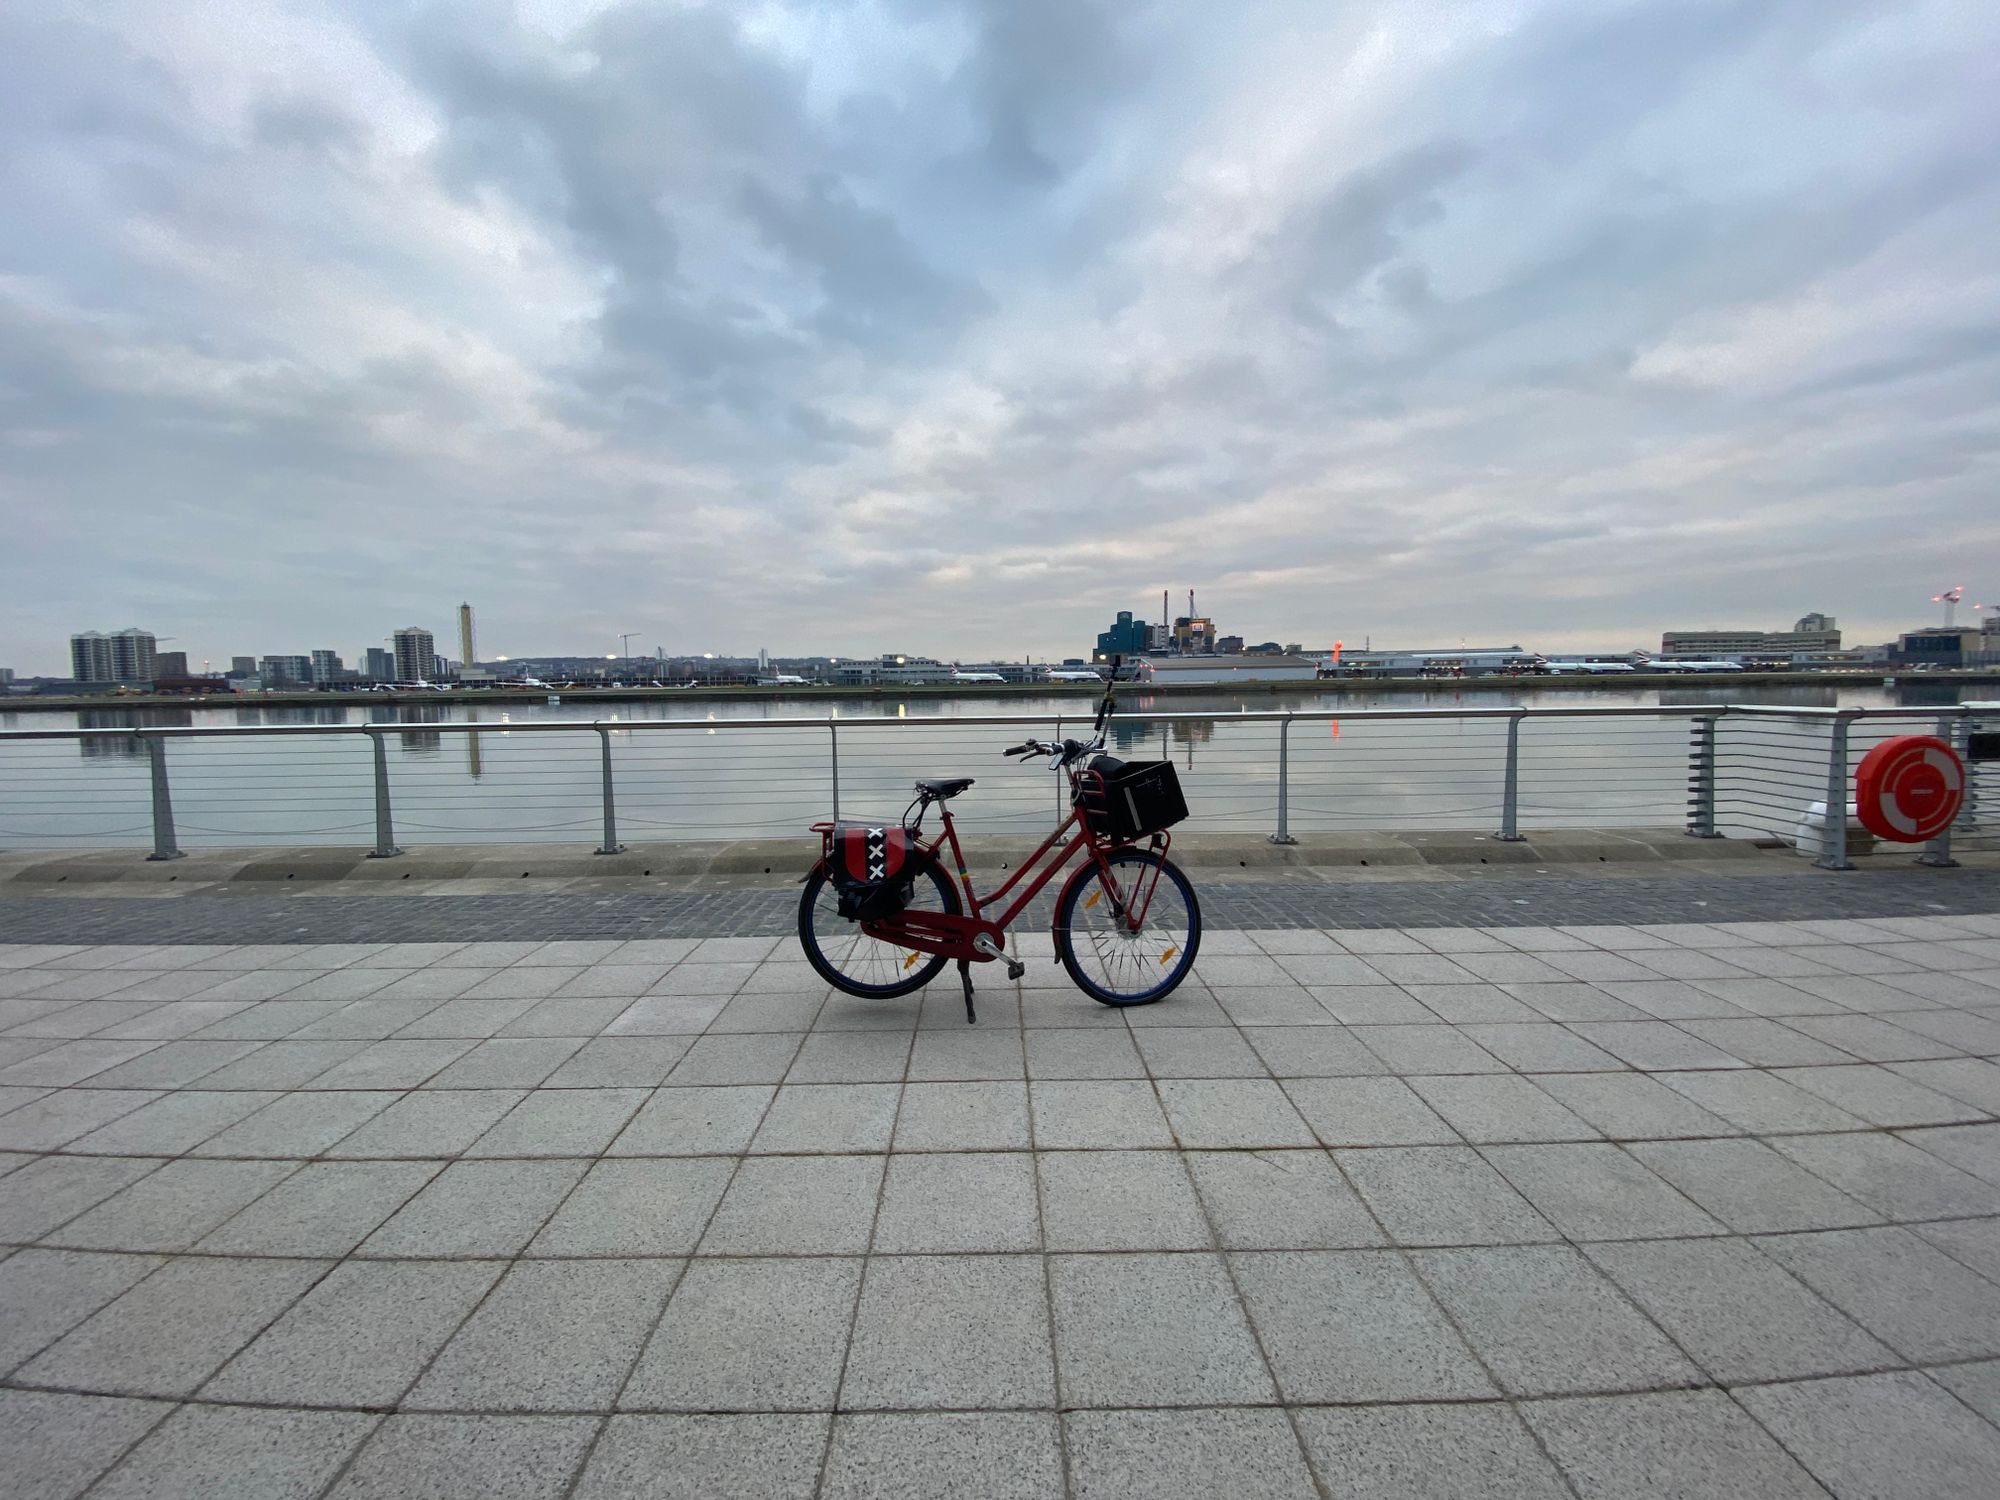 Red Dutch bicycle on a paved area in front of a dock. London City Airport is on the other side.